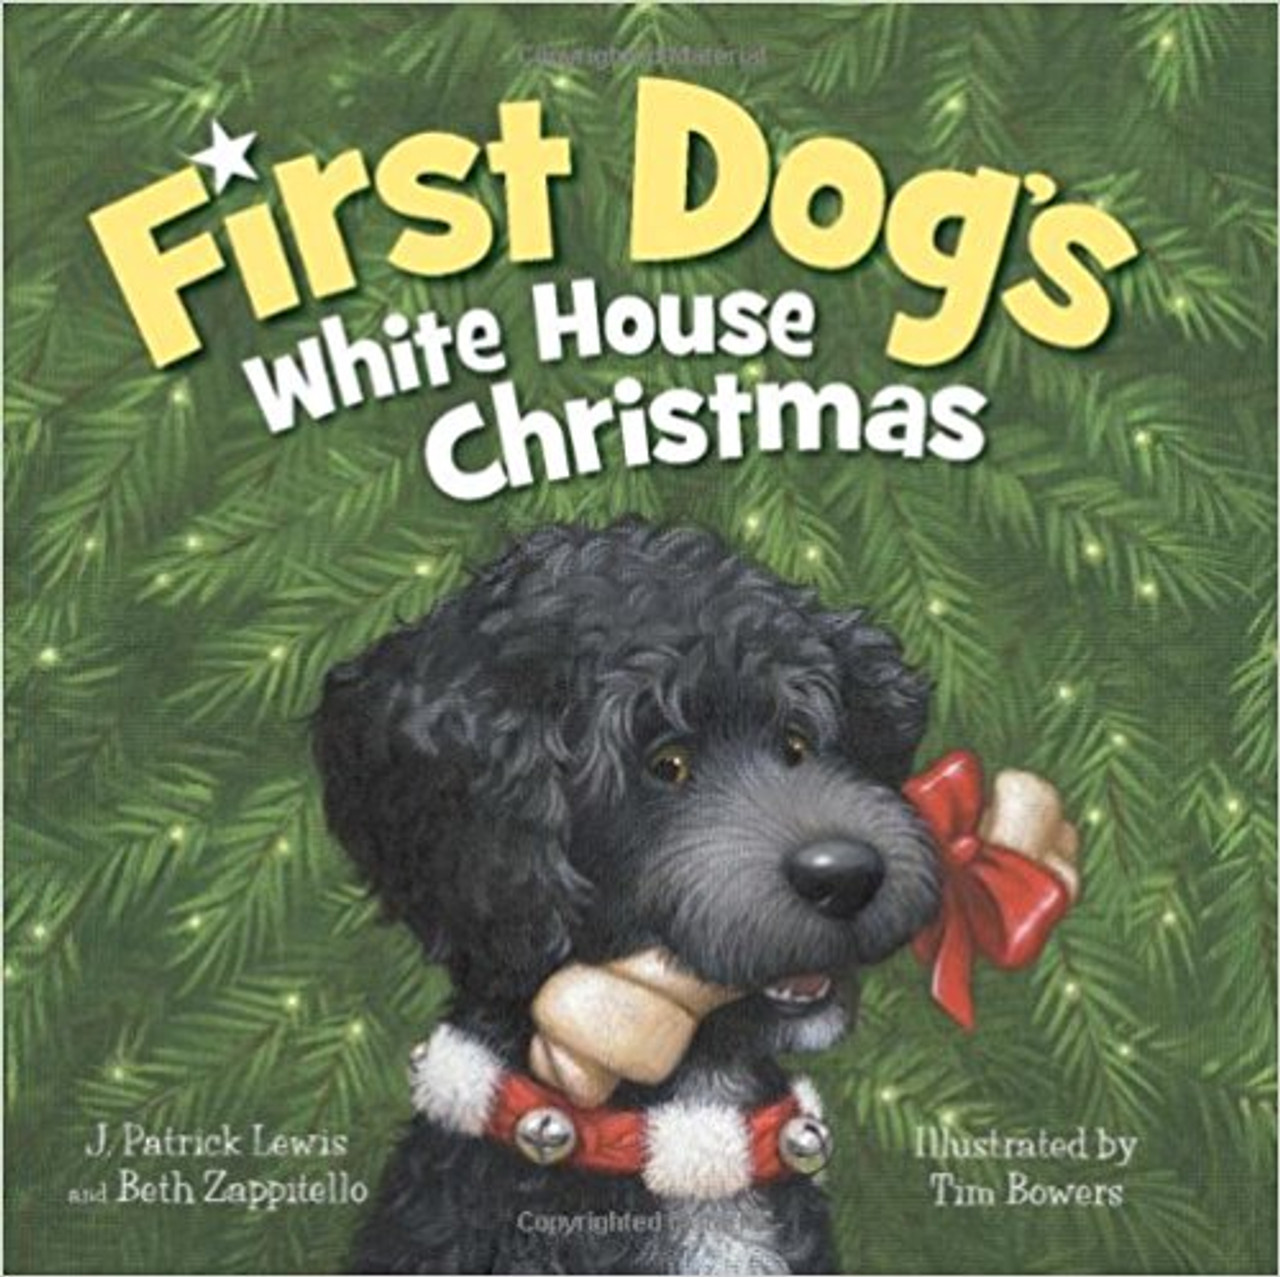 First Dog's White House Christmas by J Patrick Lewis